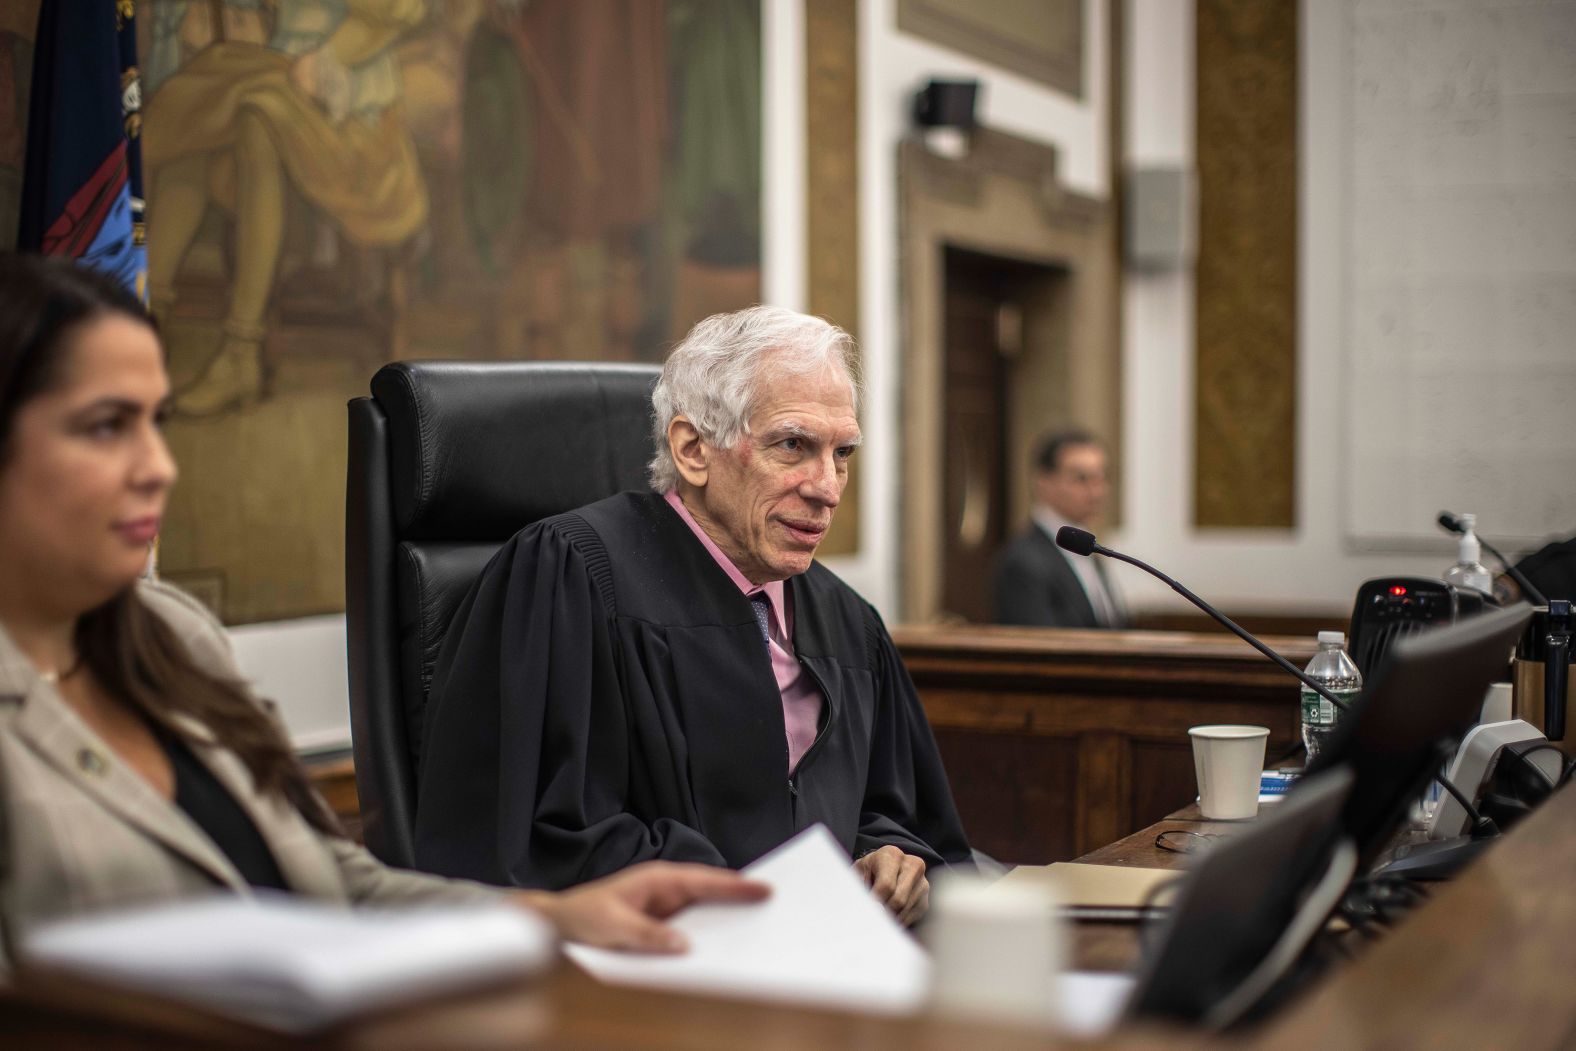 Judge Arthur Engoron presides over the trial on October 3. A week earlier, Engoron ruled that Trump and his co-defendants were liable for fraud.